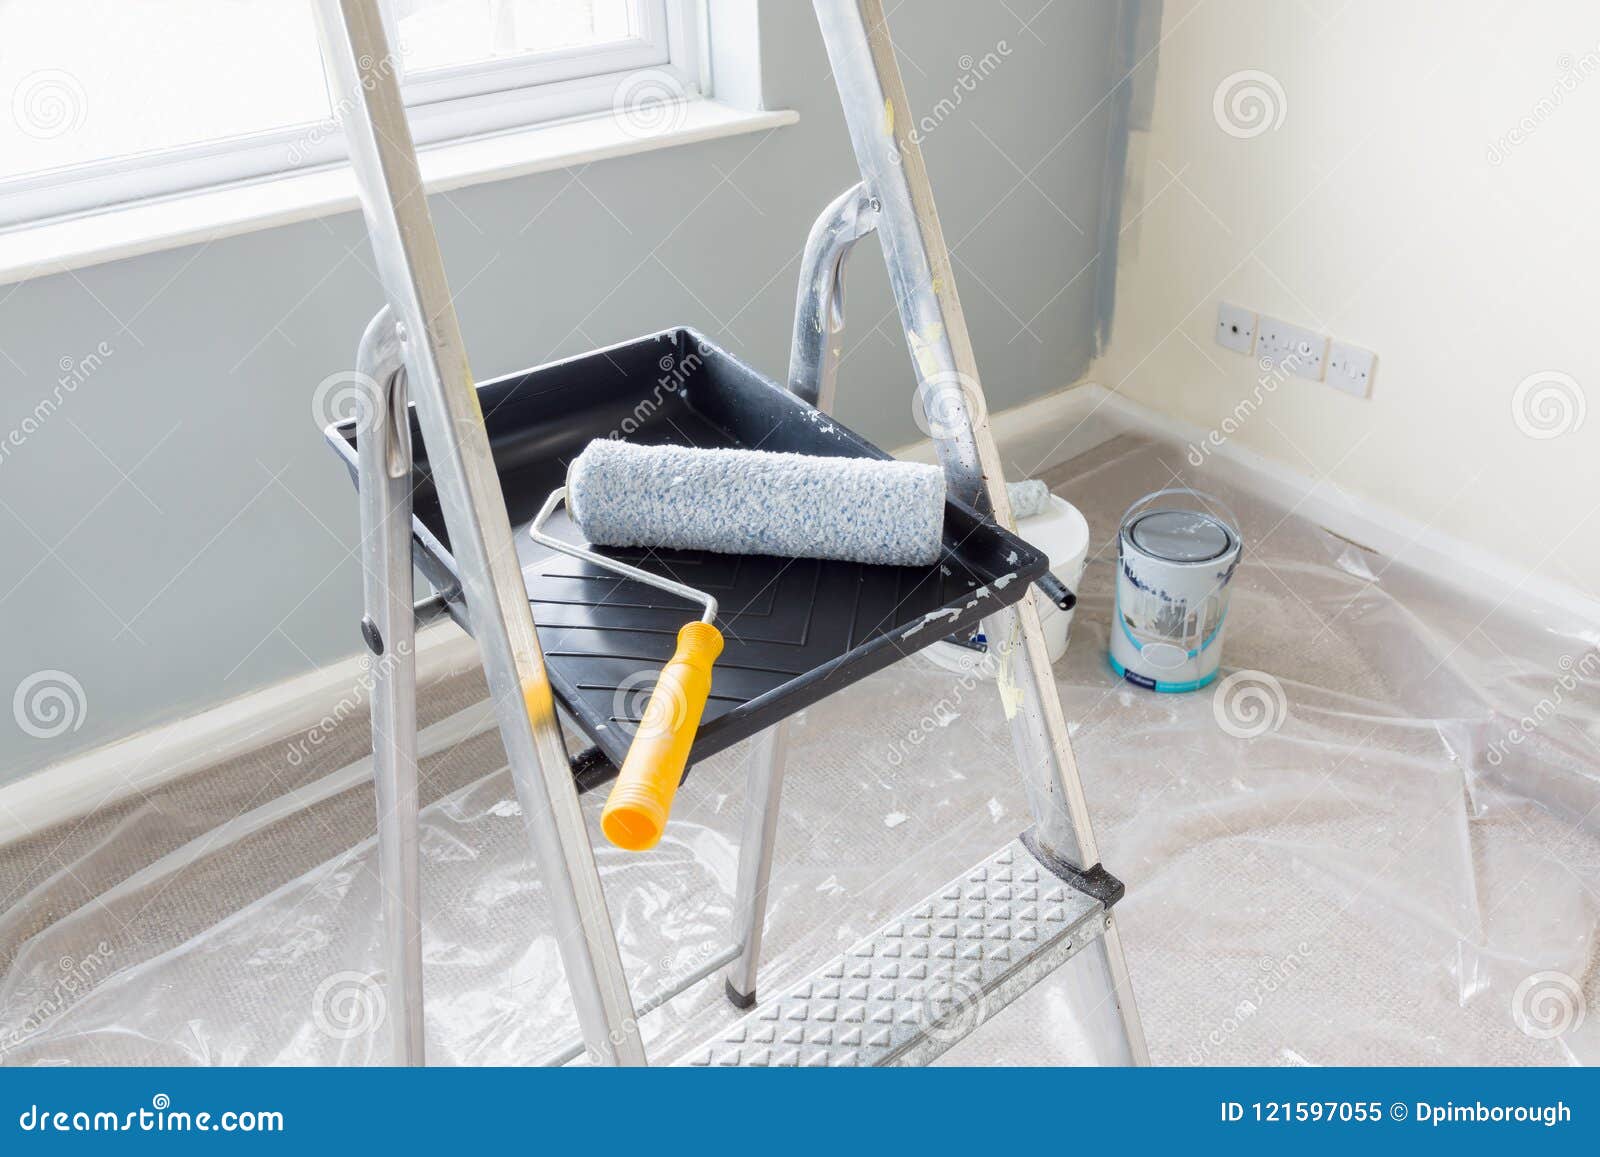 Painting and decorating stock image. Image of restoration - 121597055